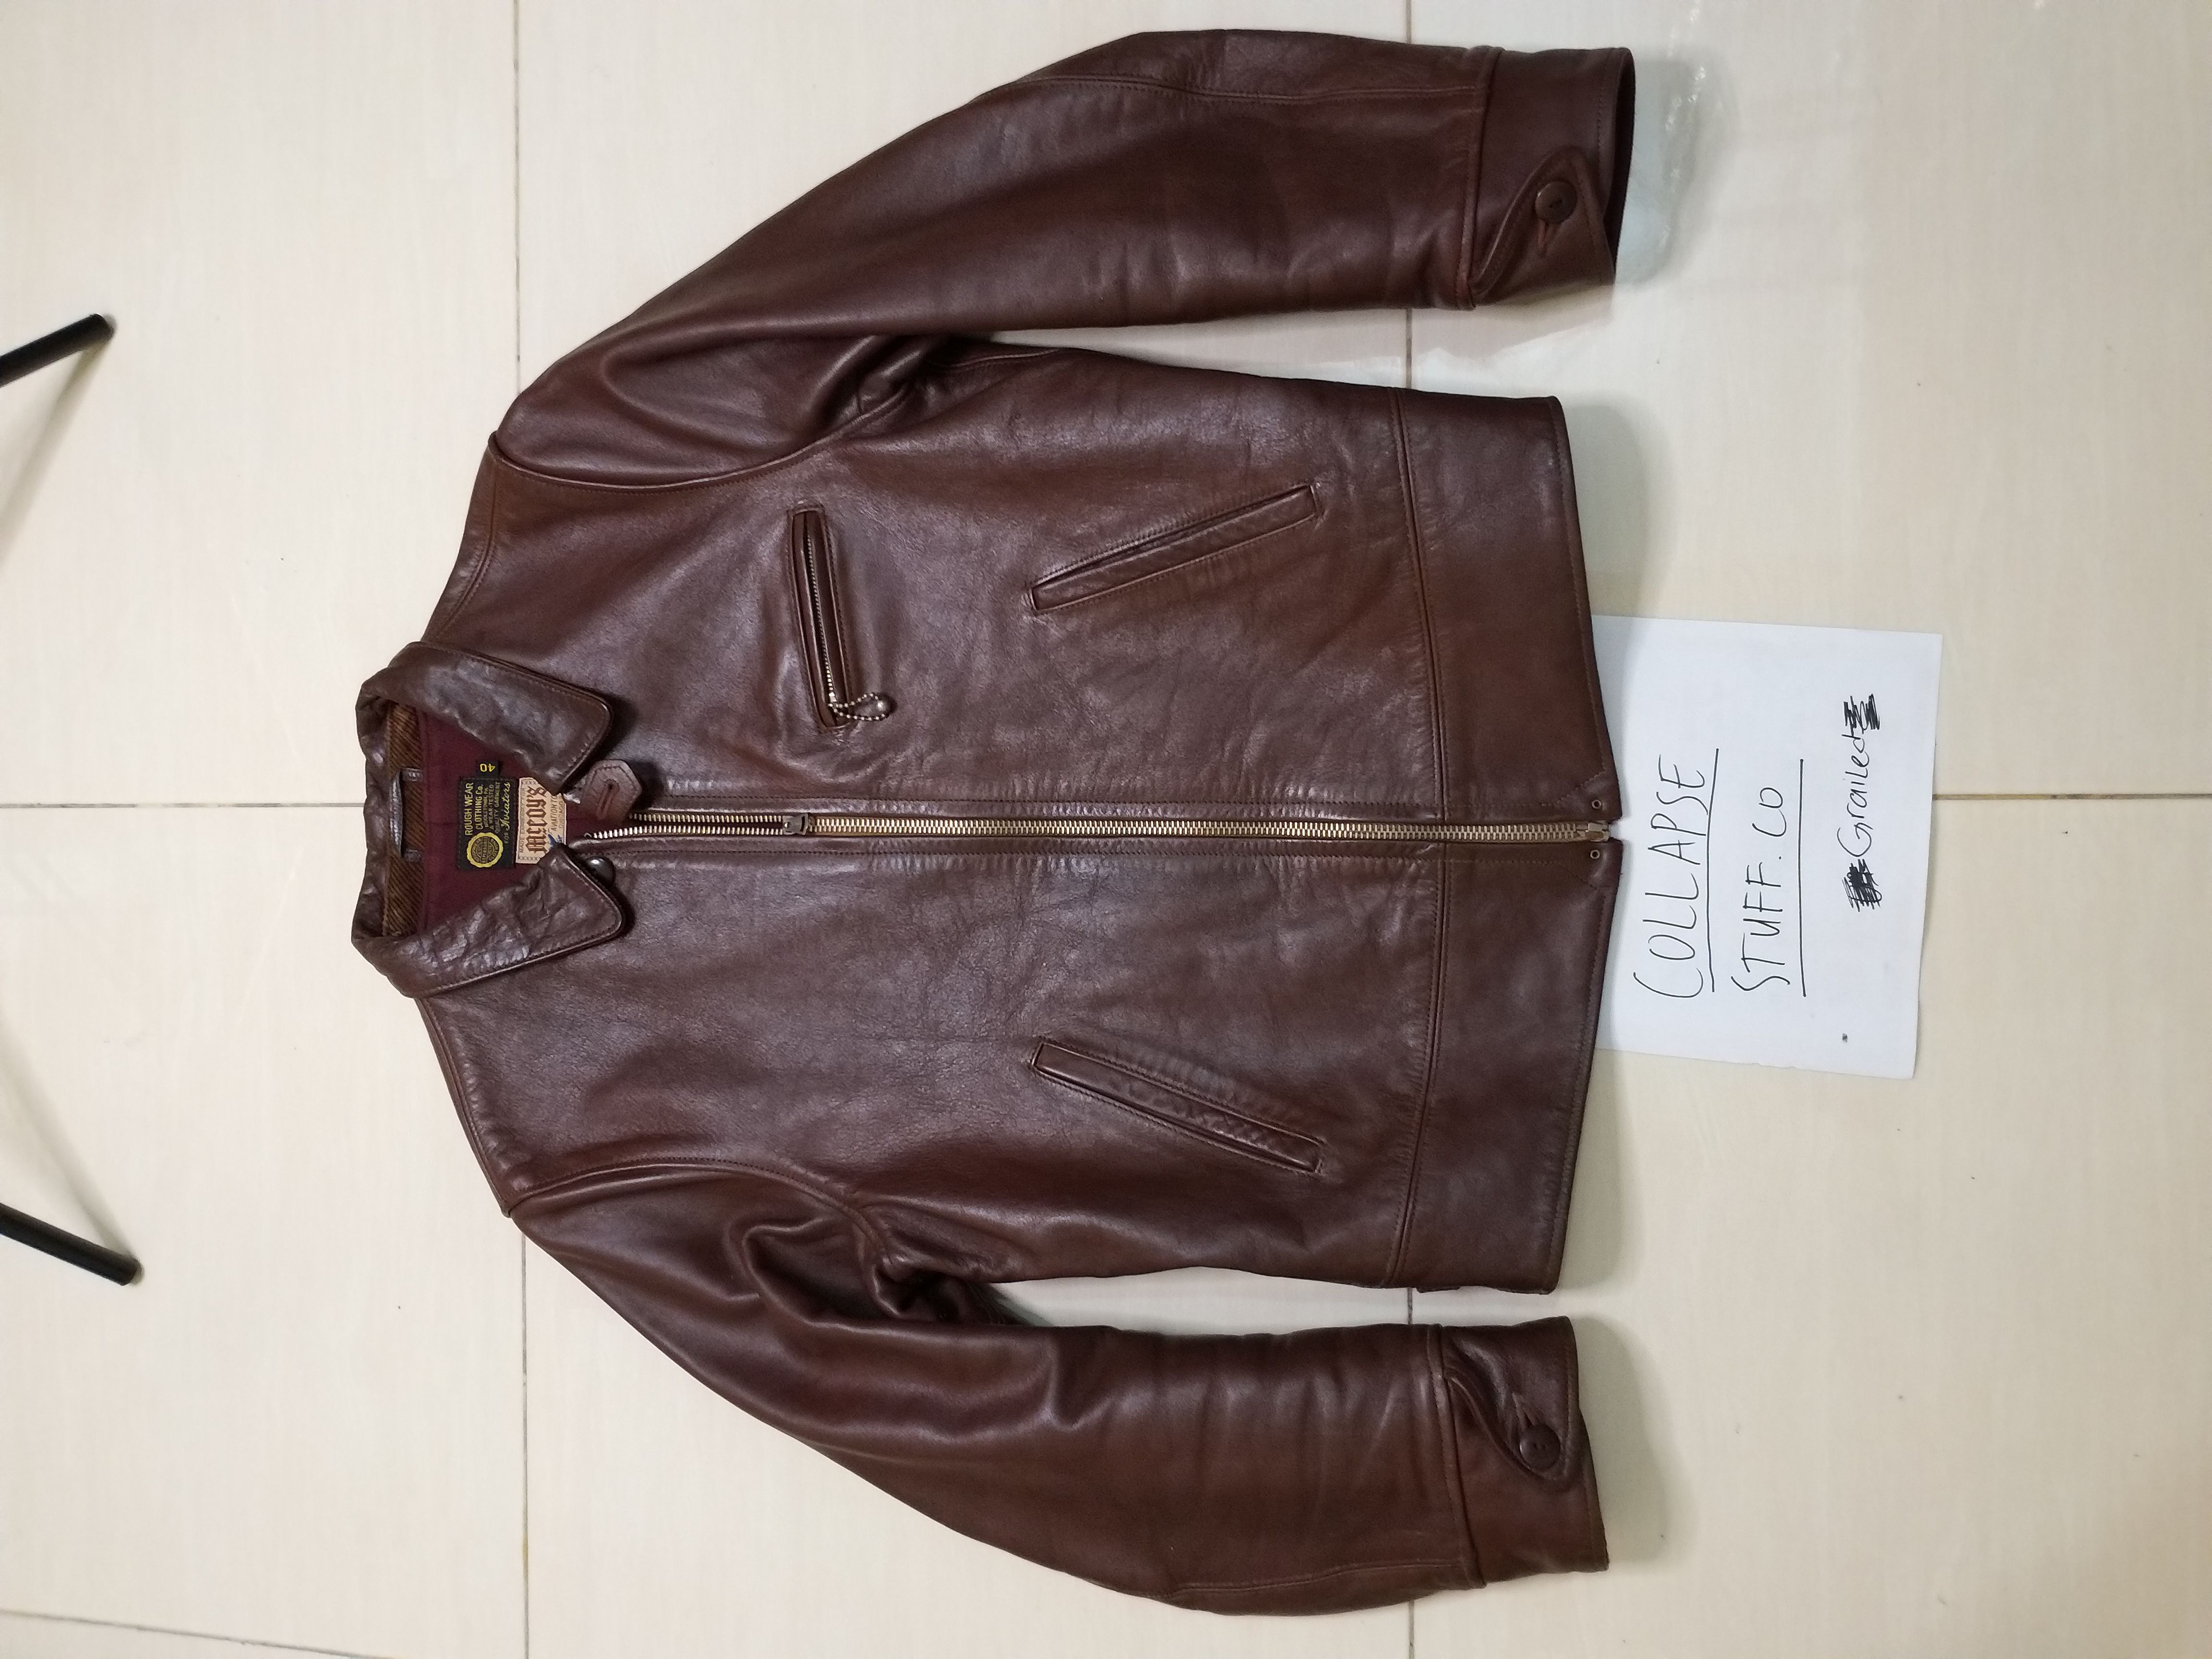 The Real McCoy's The Real McCoy's roughwear clothing 30s jacket for Aviators Size US L / EU 52-54 / 3 - 1 Preview